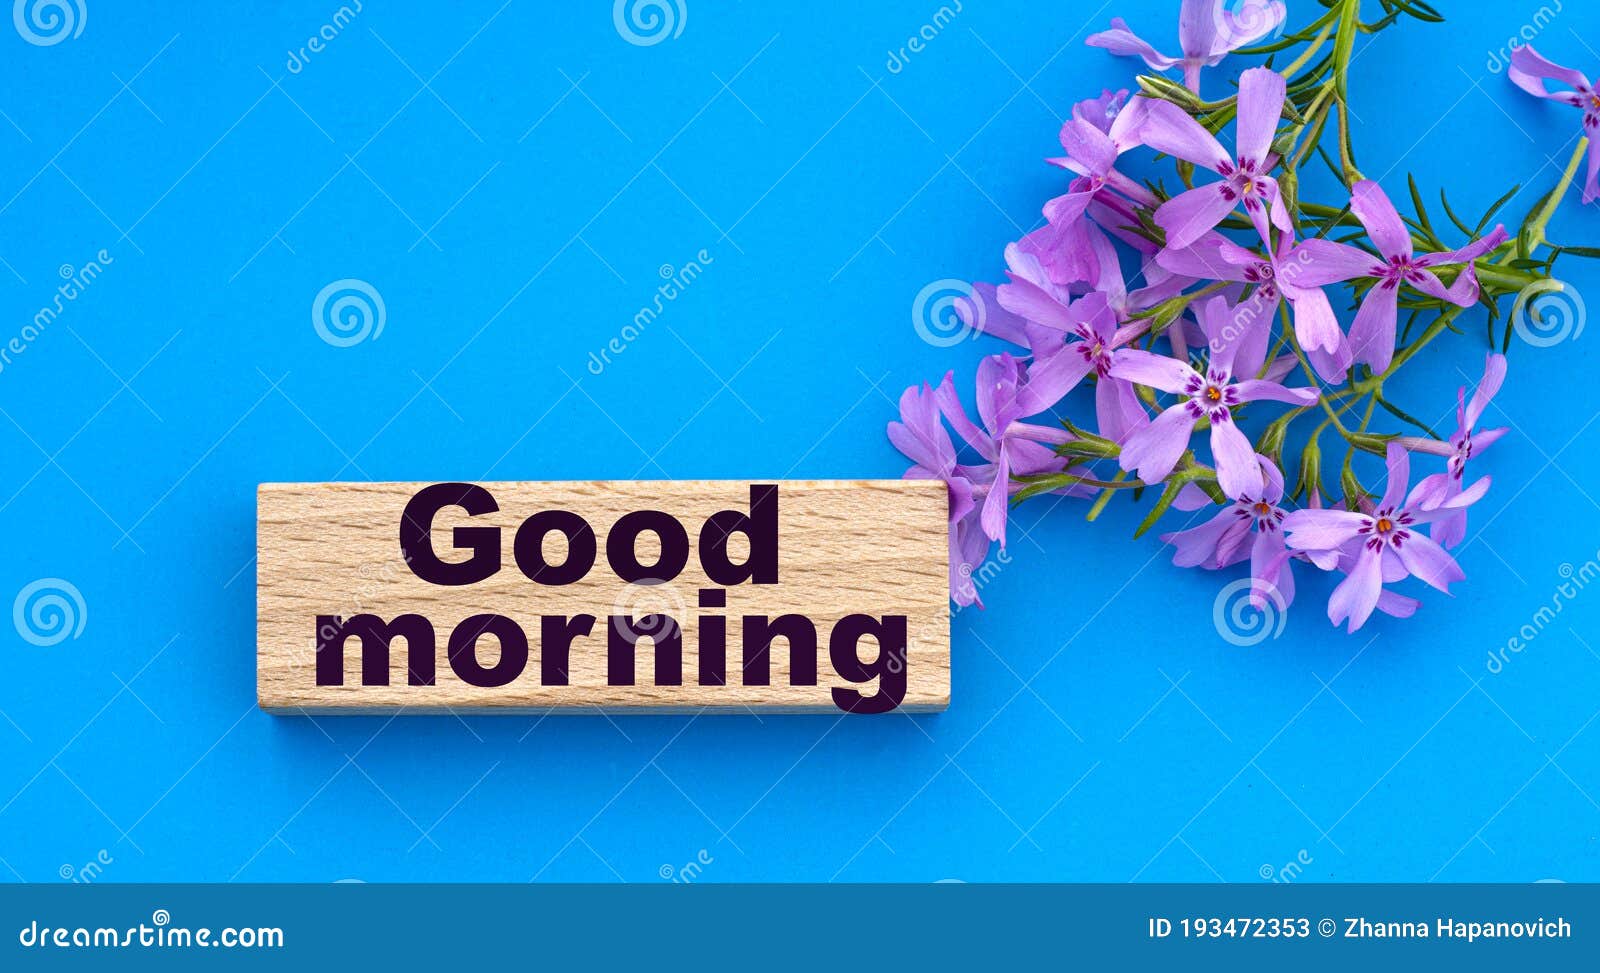 GOOD MORNING Words on a Wooden Block on a Blue Background with ...